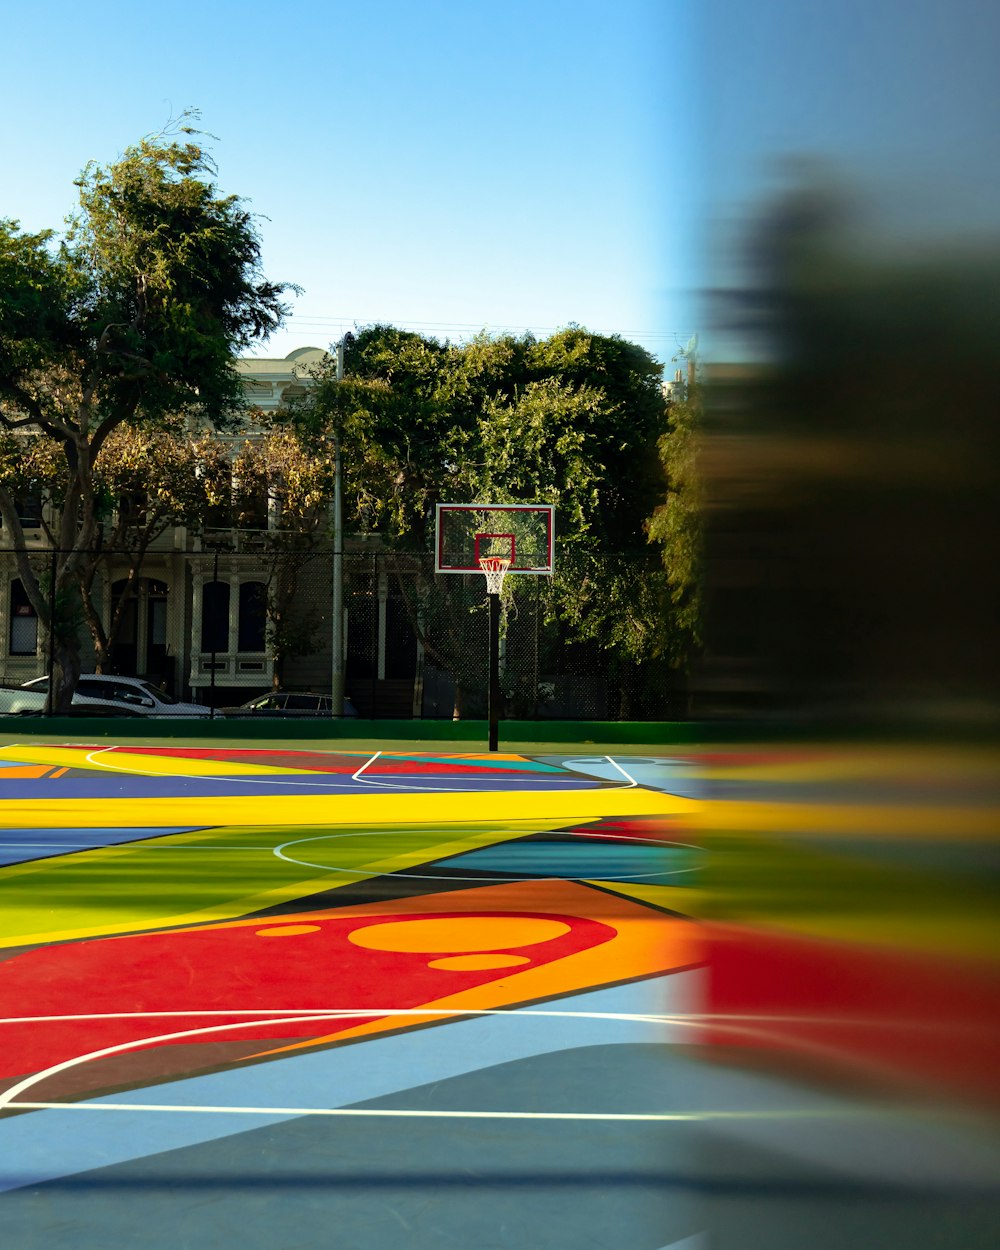 red, purple, and yellow basketball court